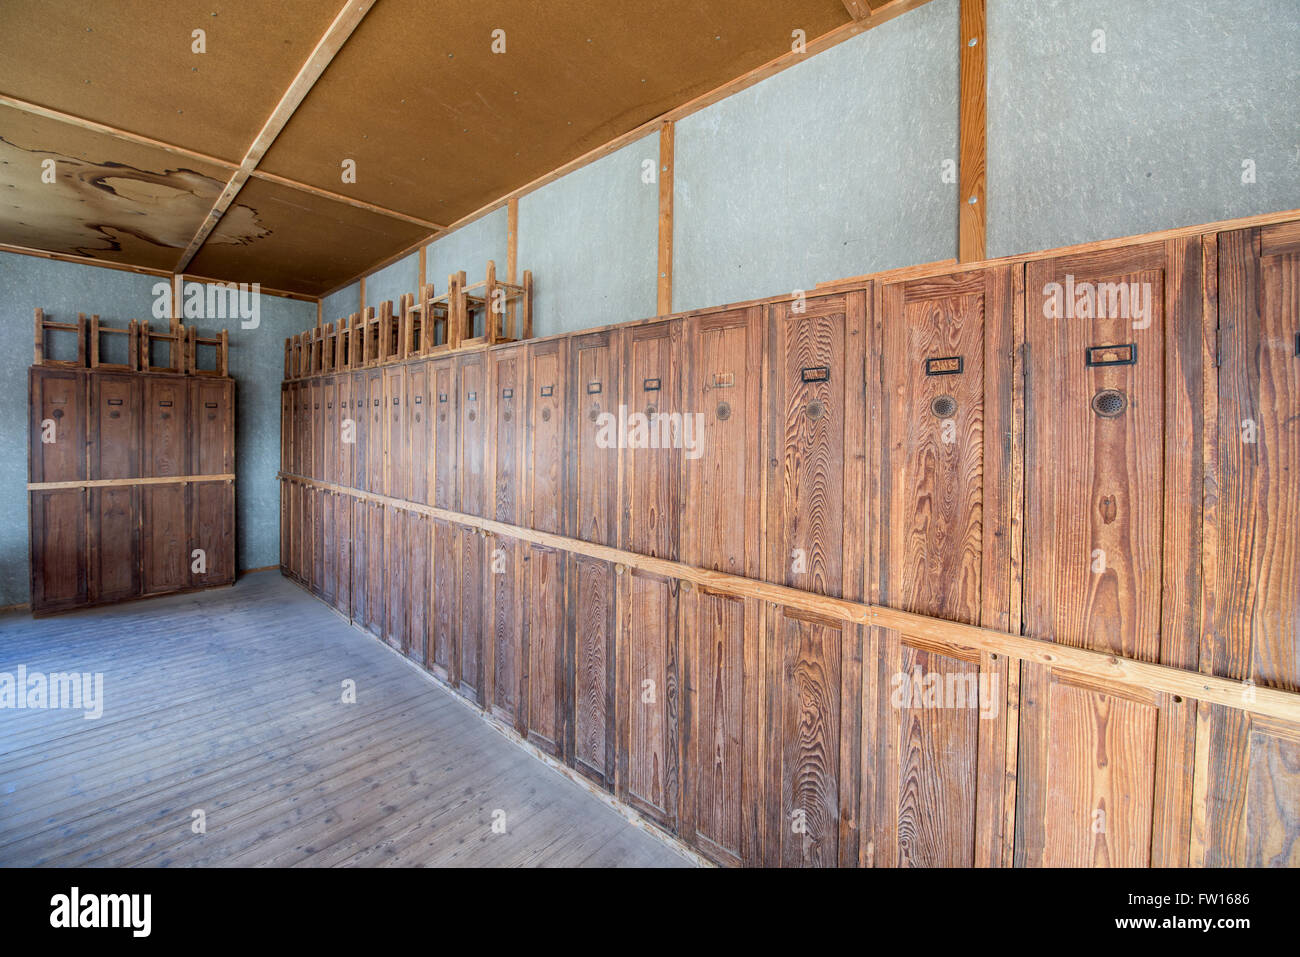 Prisoners' lockers inside the barracks in Dachau concentration camp Stock Photo